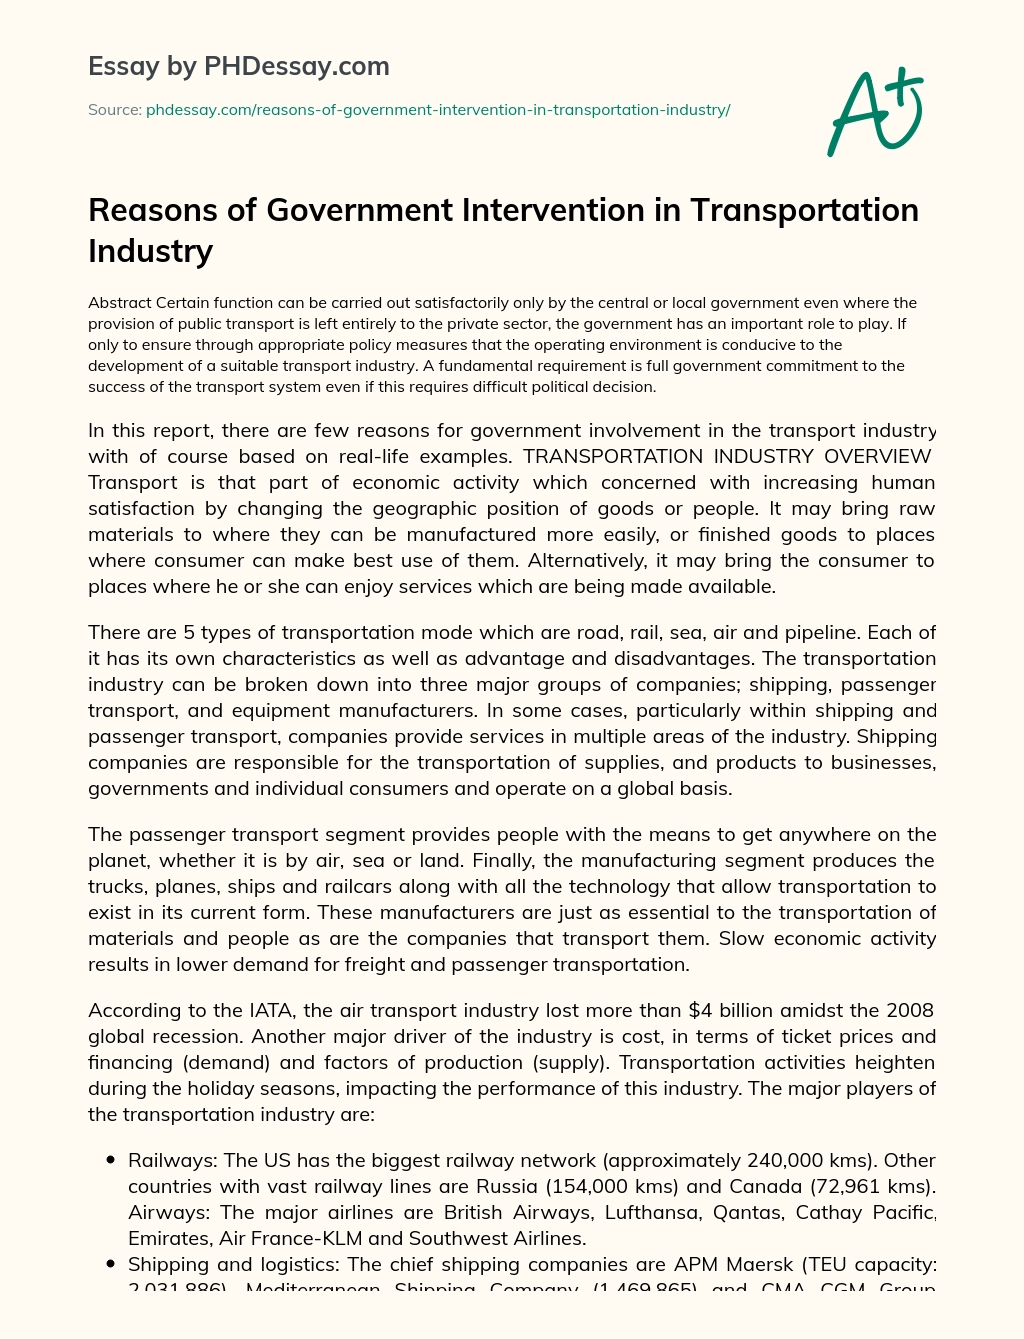 Reasons of Government Intervention in Transportation Industry essay